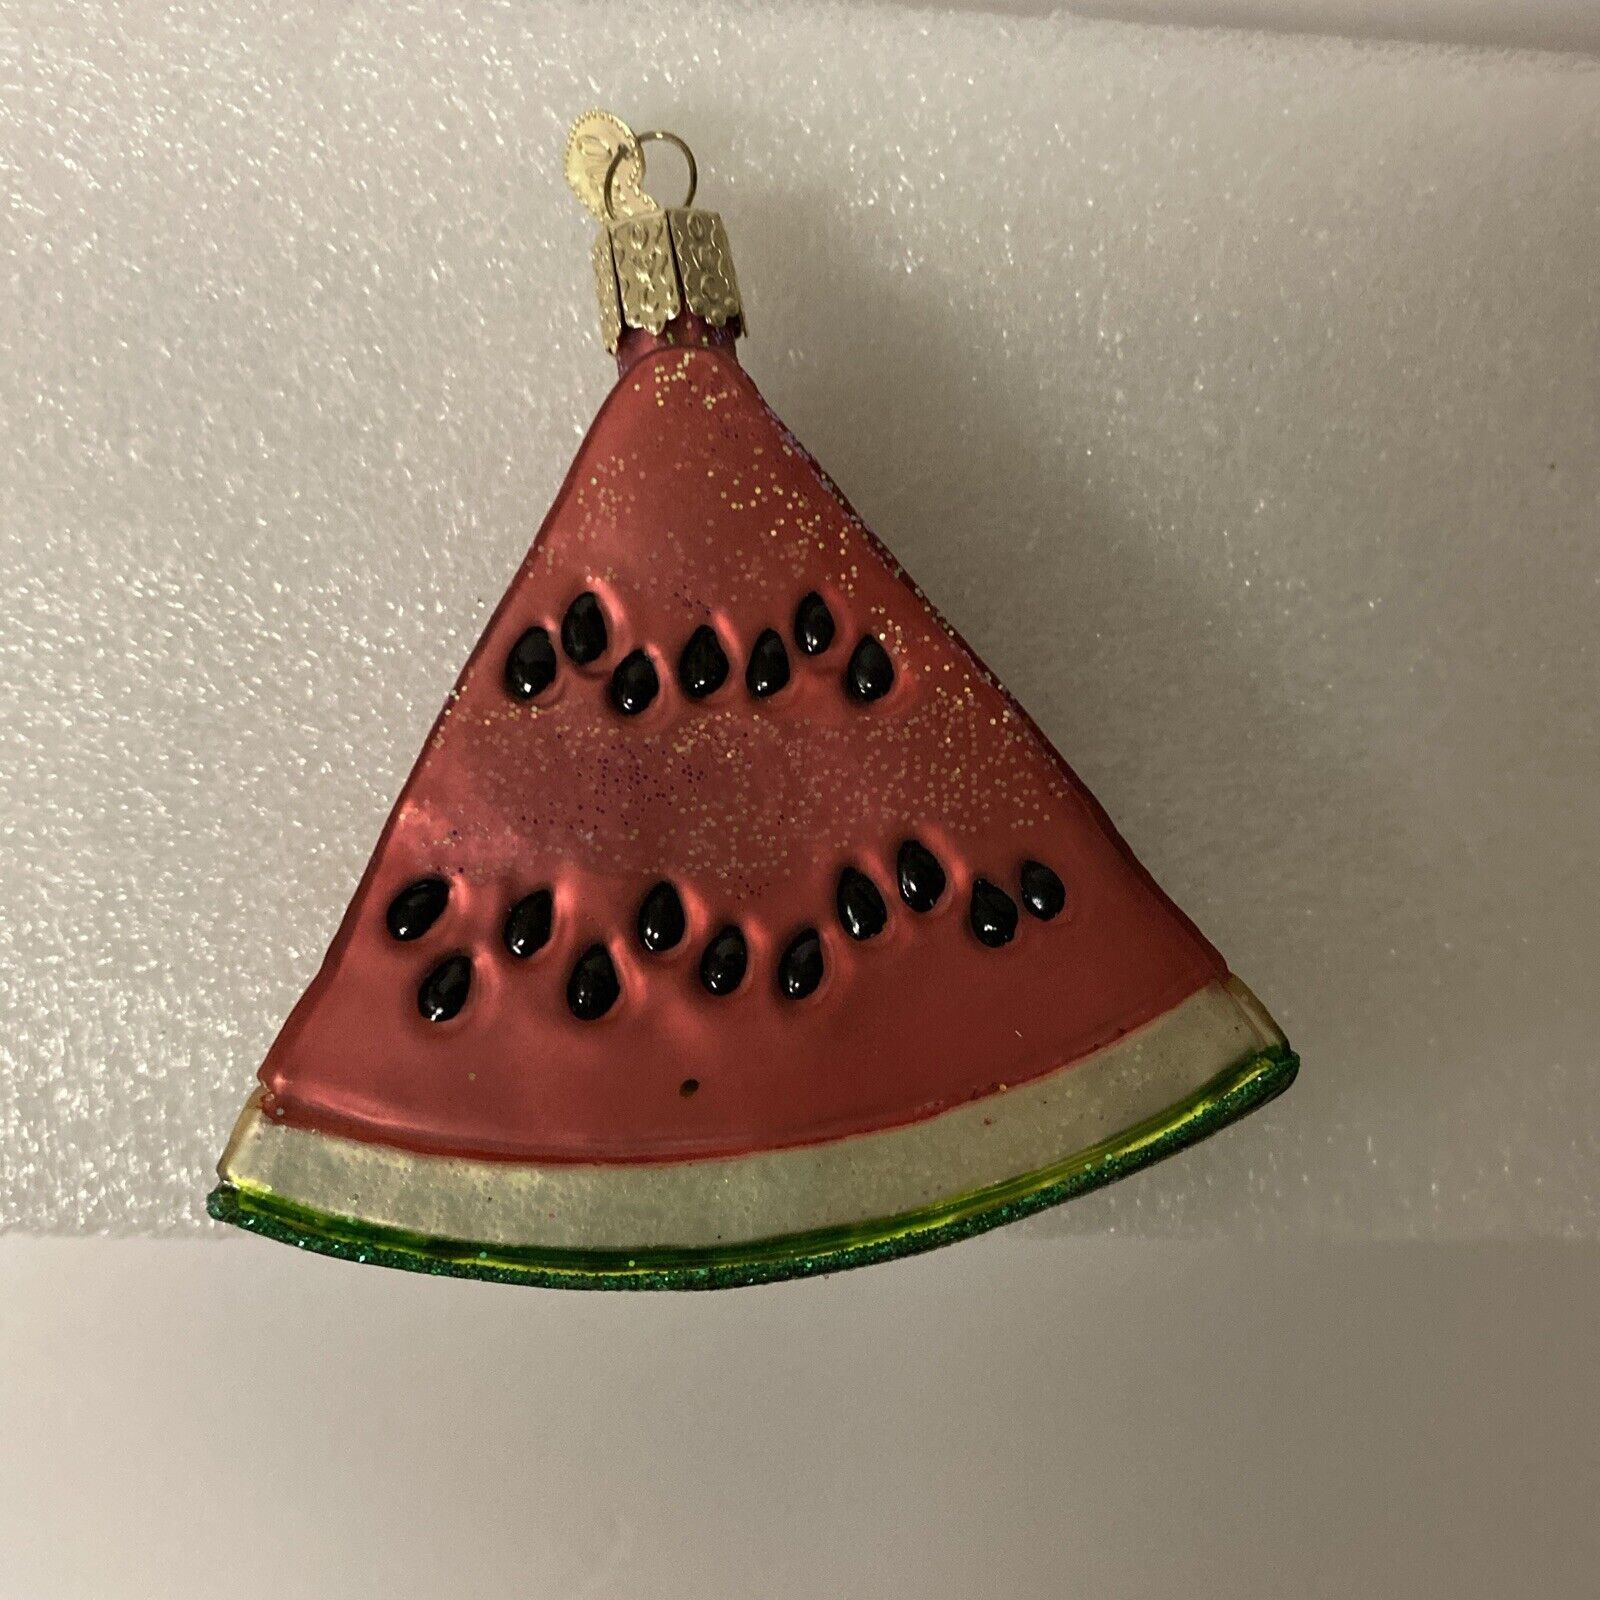 OLD WORLD CHRISTMAS - WATERMELON WEDGE - BLOWN GLASS ORNAMENT - Used W/TAG